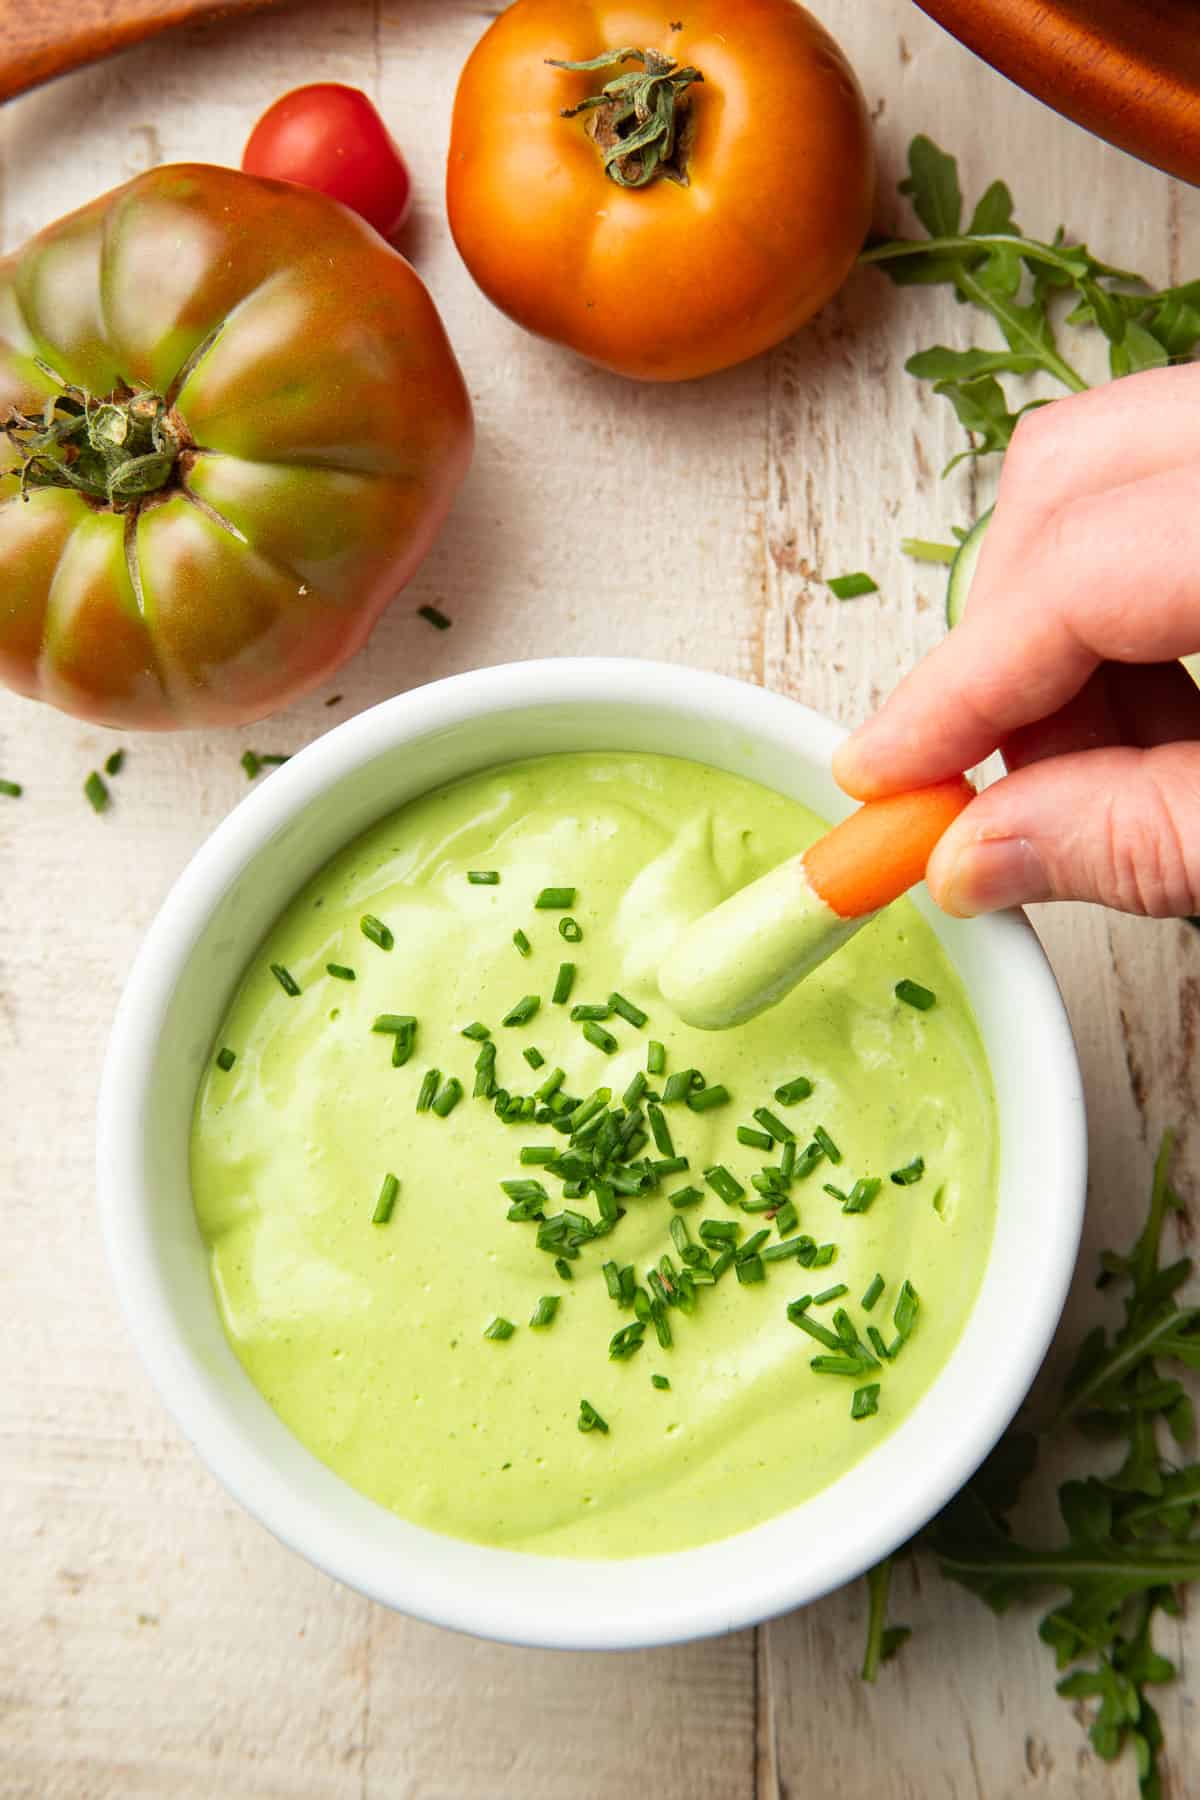 Hand dipping a baby carrot into a bowl of Vegan Green Goddess Dressing sitting on a white wooden surface with fresh vegetables.